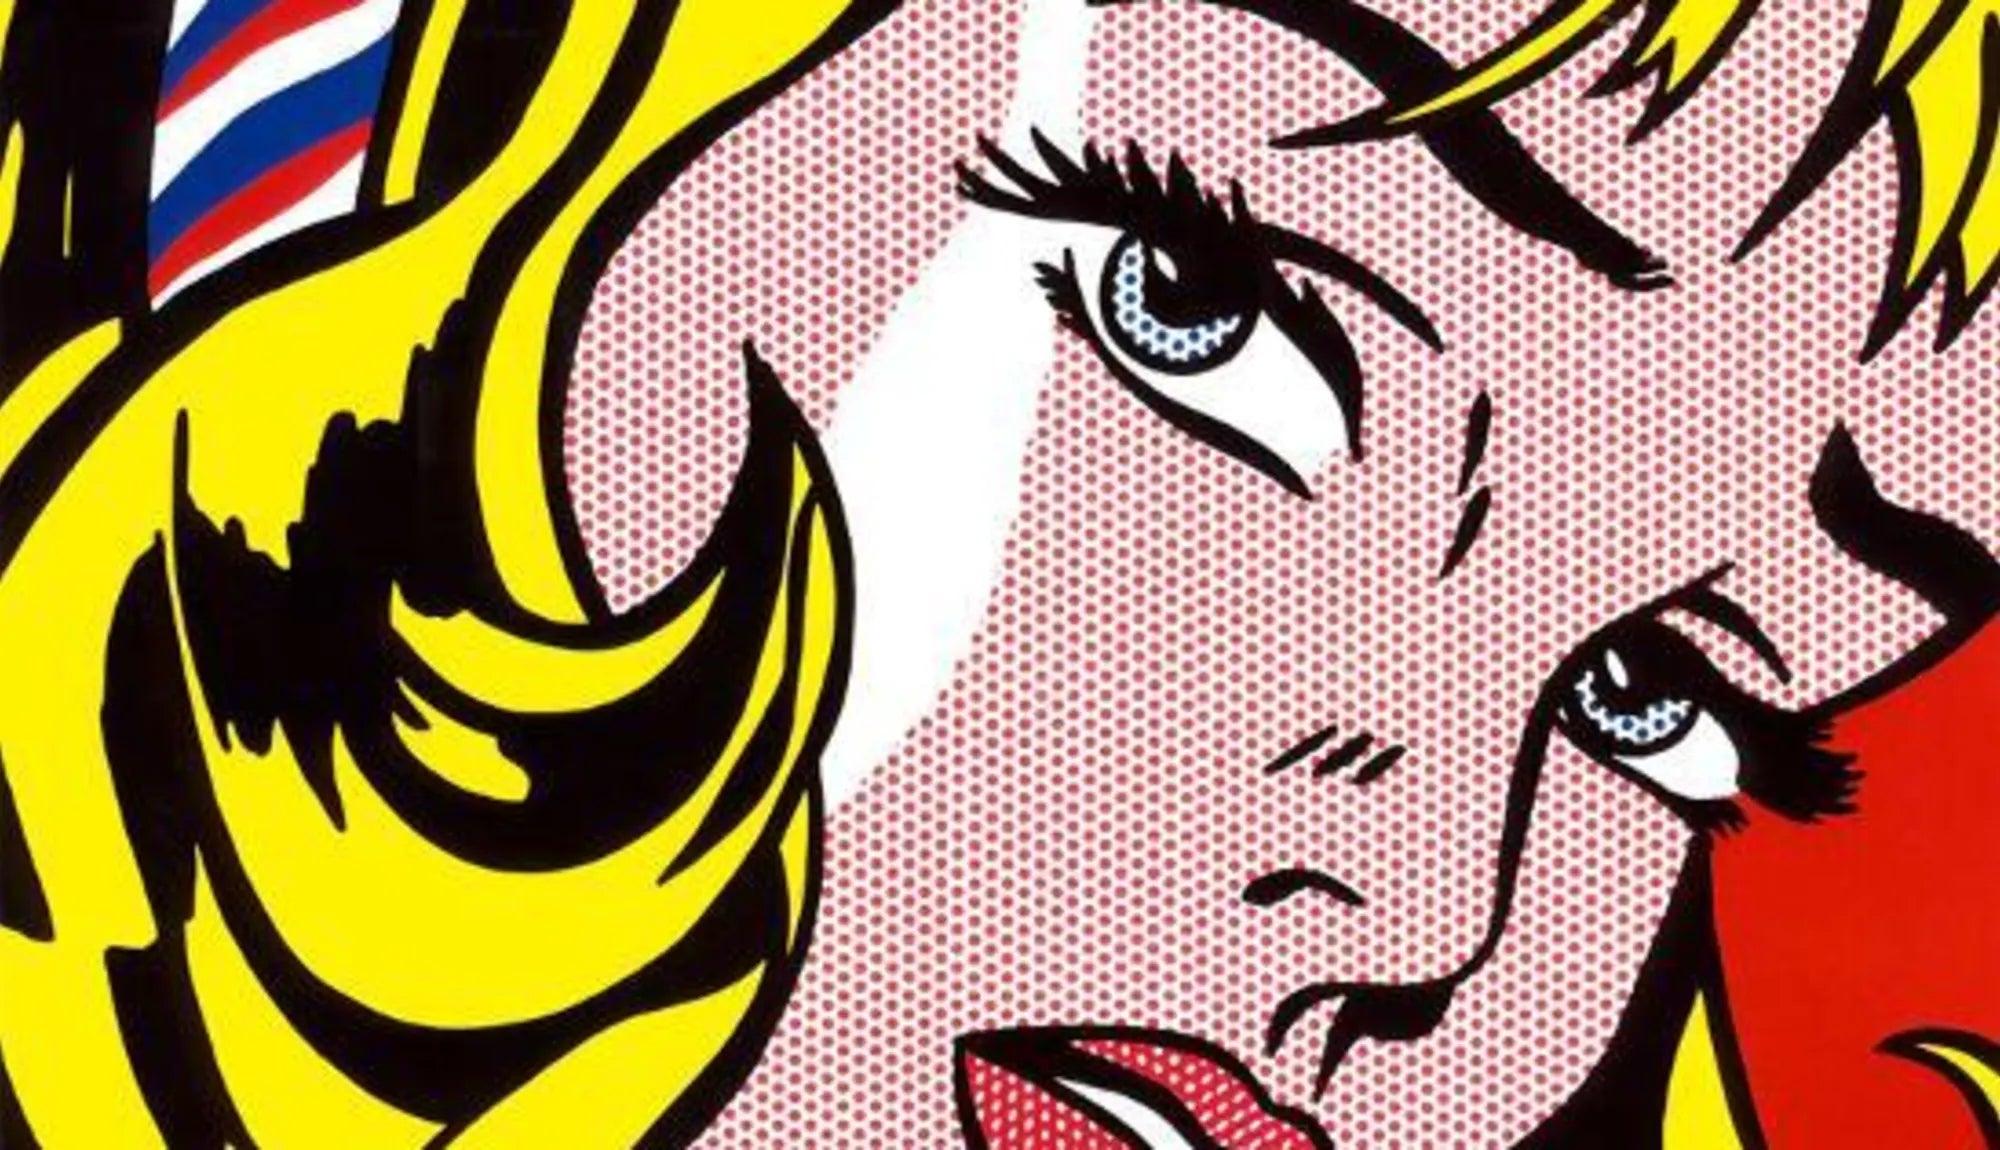 The Life and Times of Roy Lichtenstein